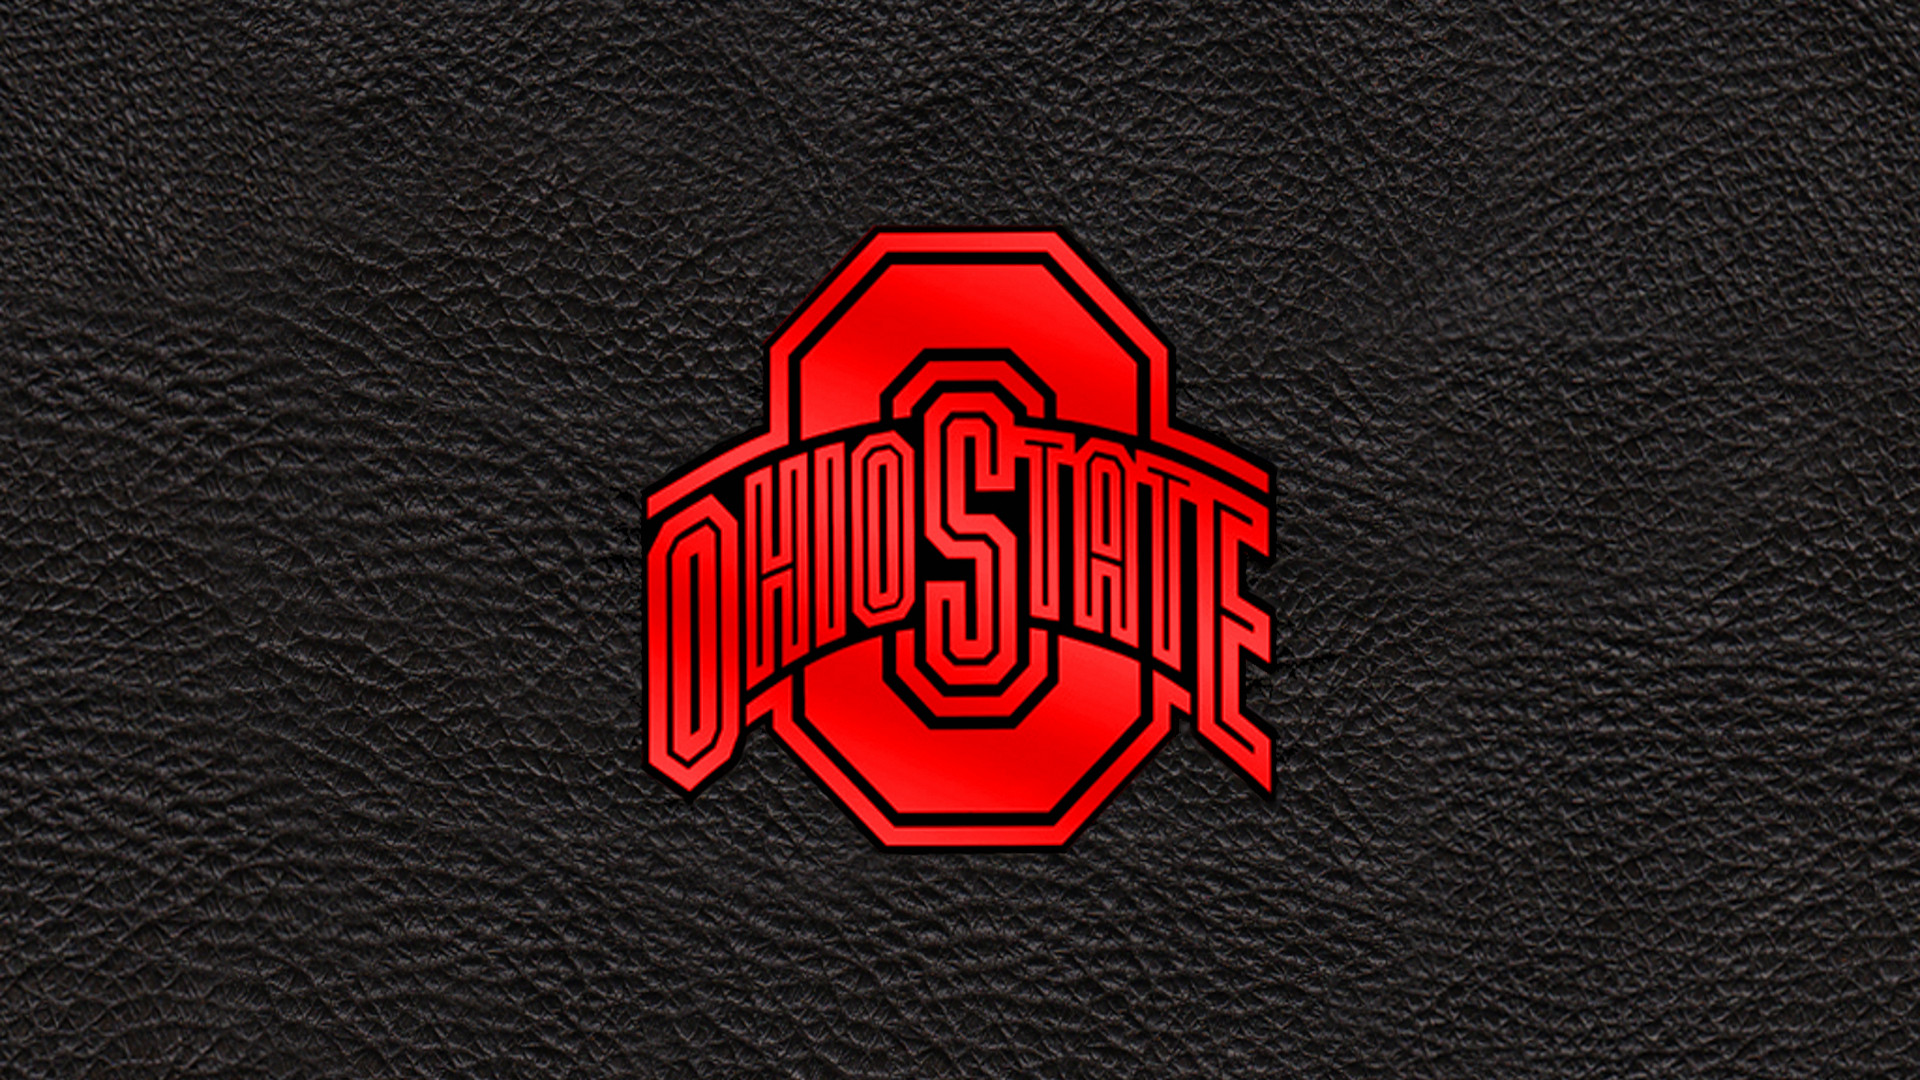 1920x1080 Awesome Ohio State Football Wallpapers Movies Giant Widescreen Wallpapers  2560Ã1440 Ohio State Football Wallpapers